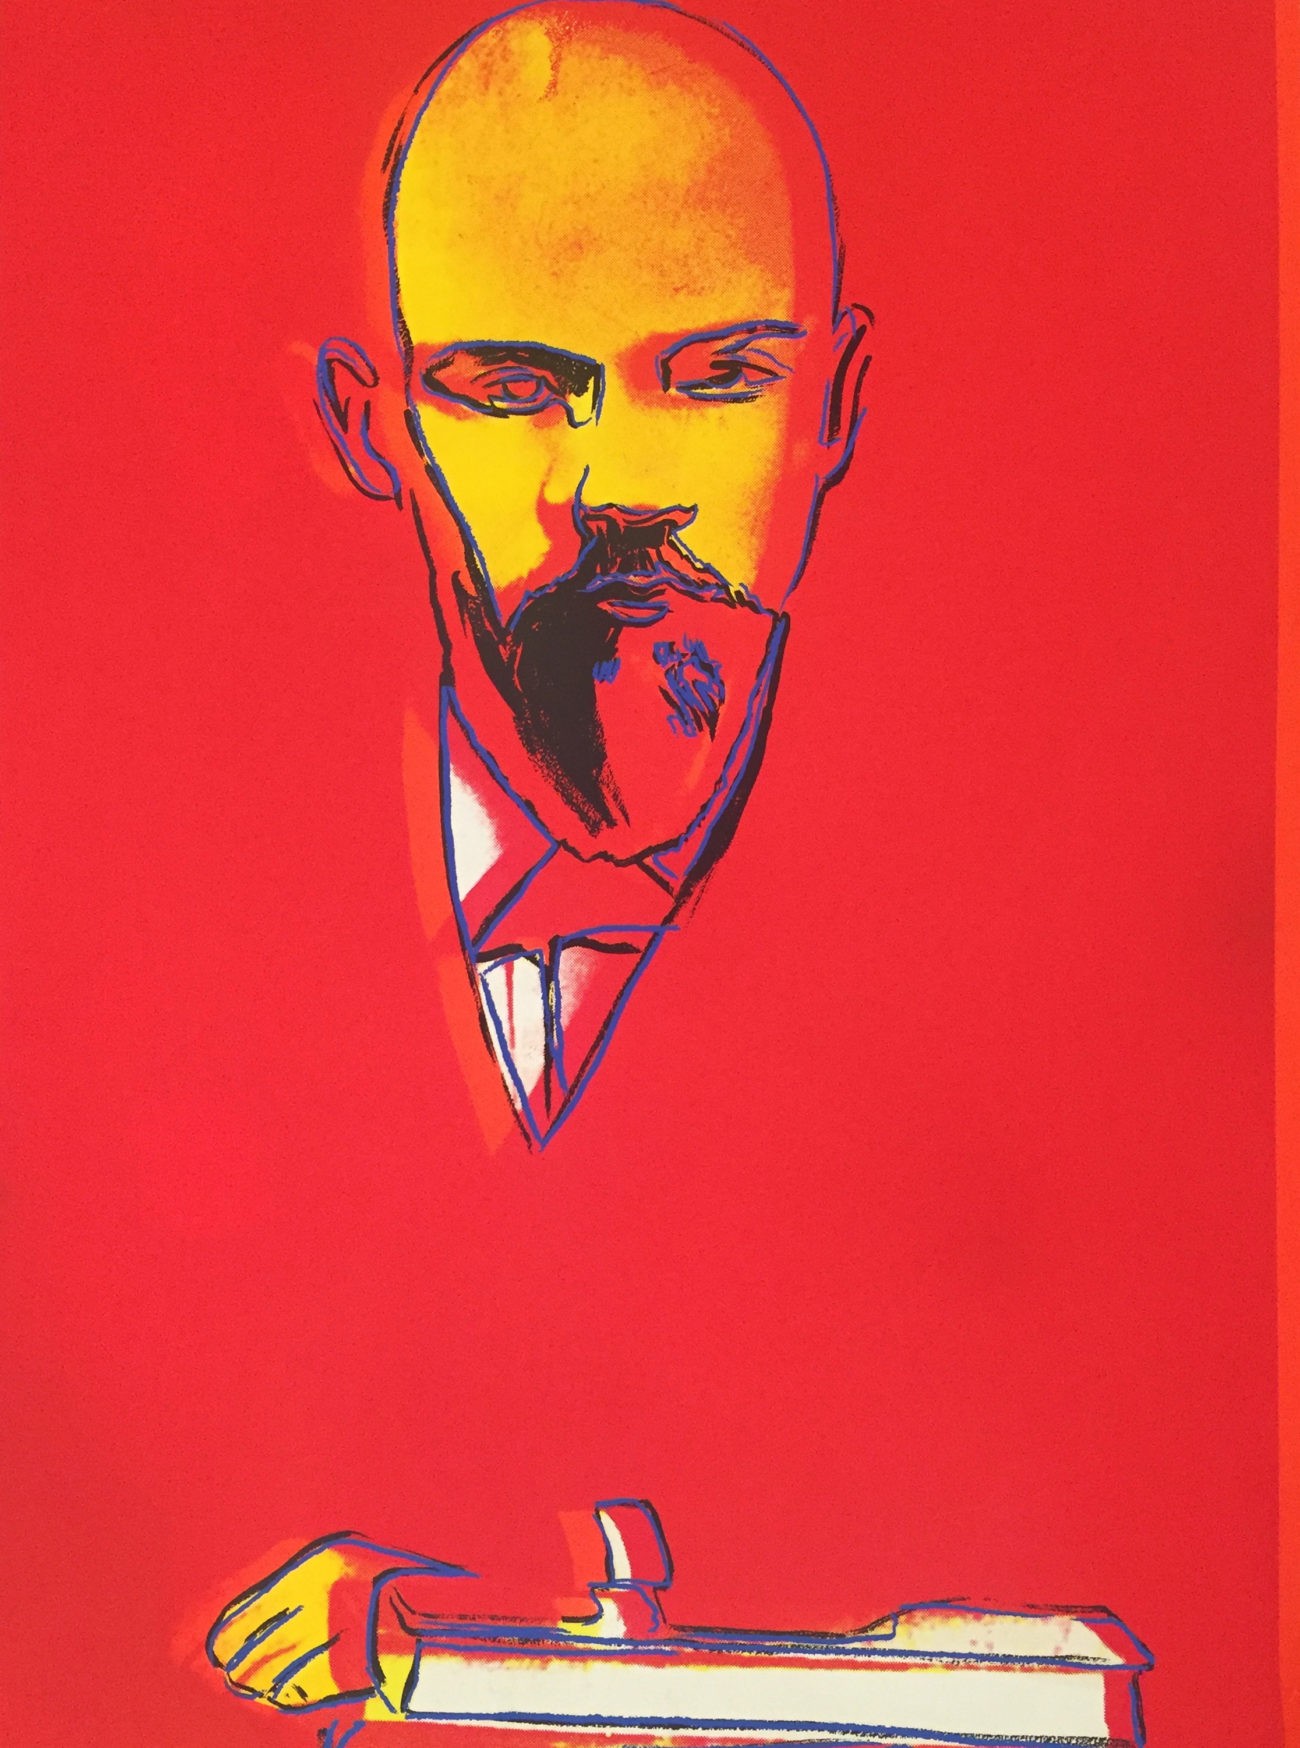 Andy Warhol | Red Lenin 403 | 1987 | Image of Artists' work.